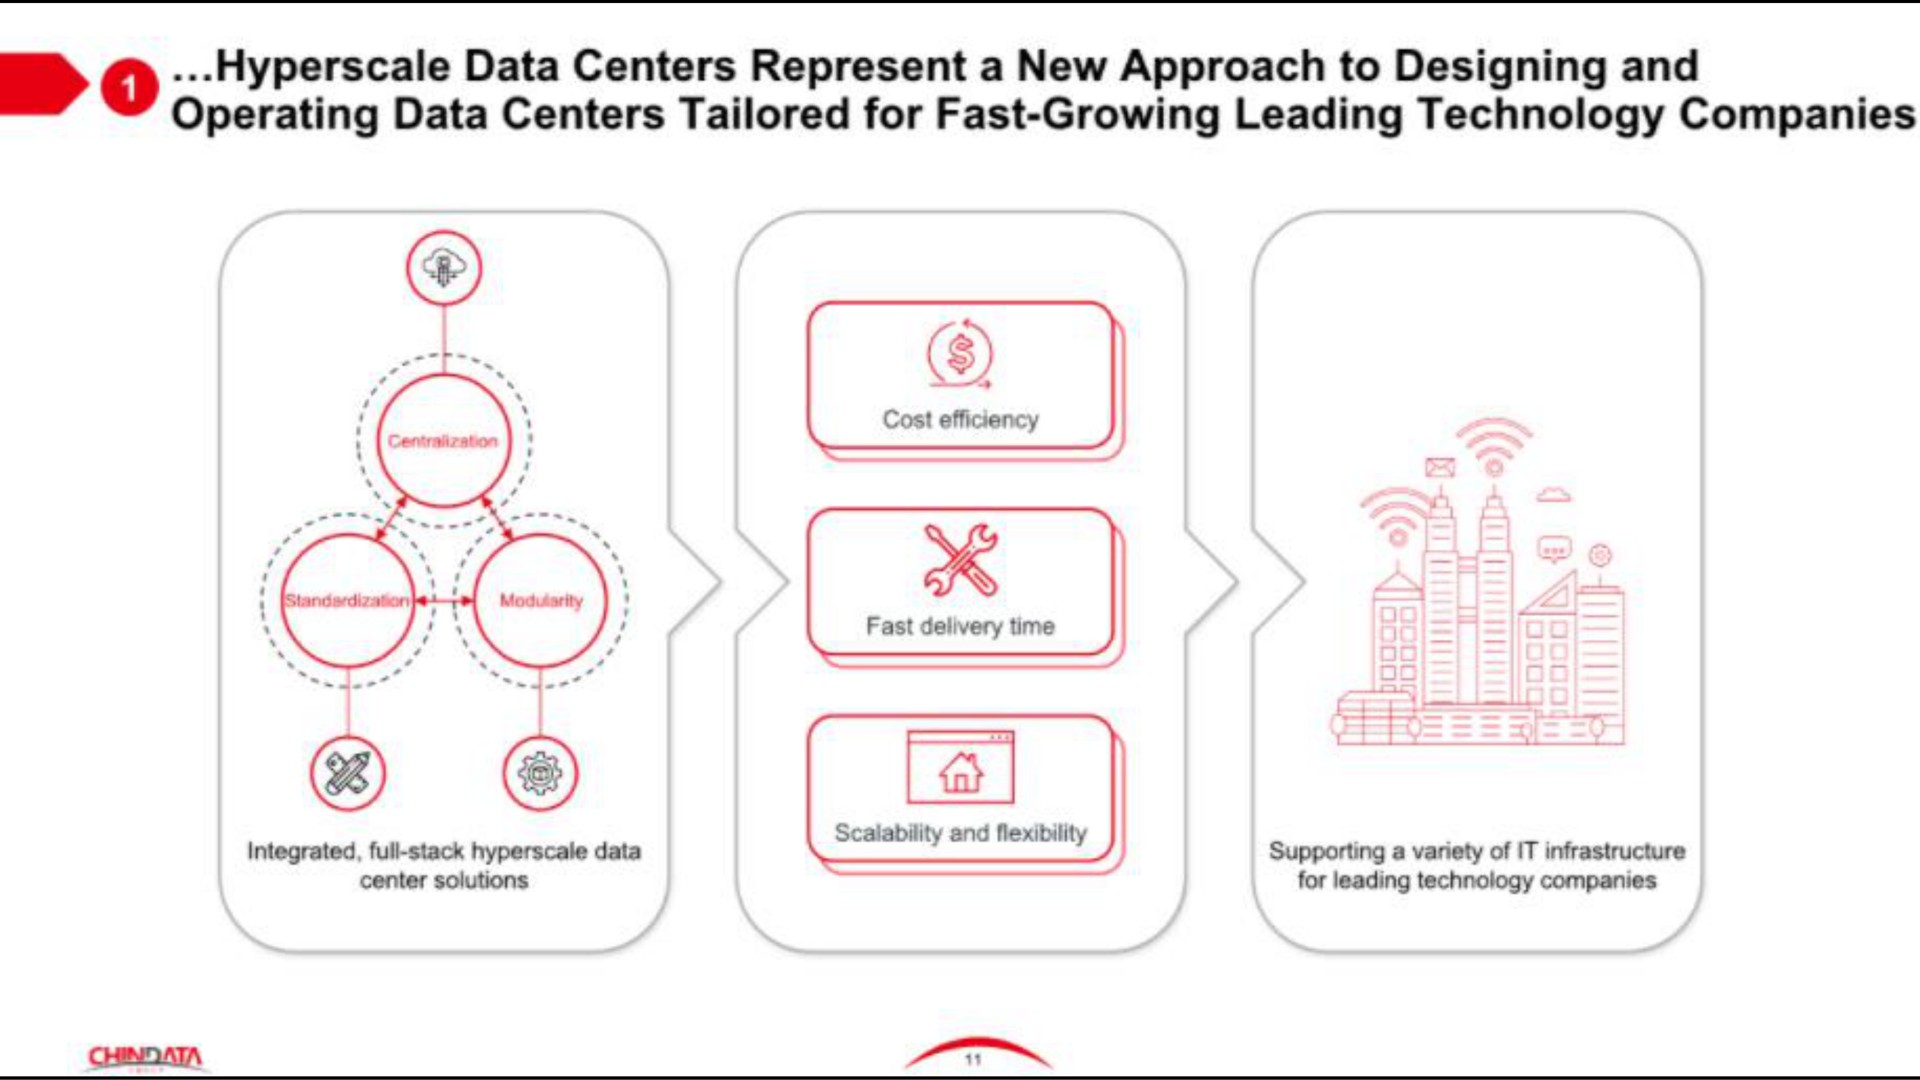 data centers represent a new approach to designing and operating data centers tailored for fast growing leading technology companies | Chindata Group